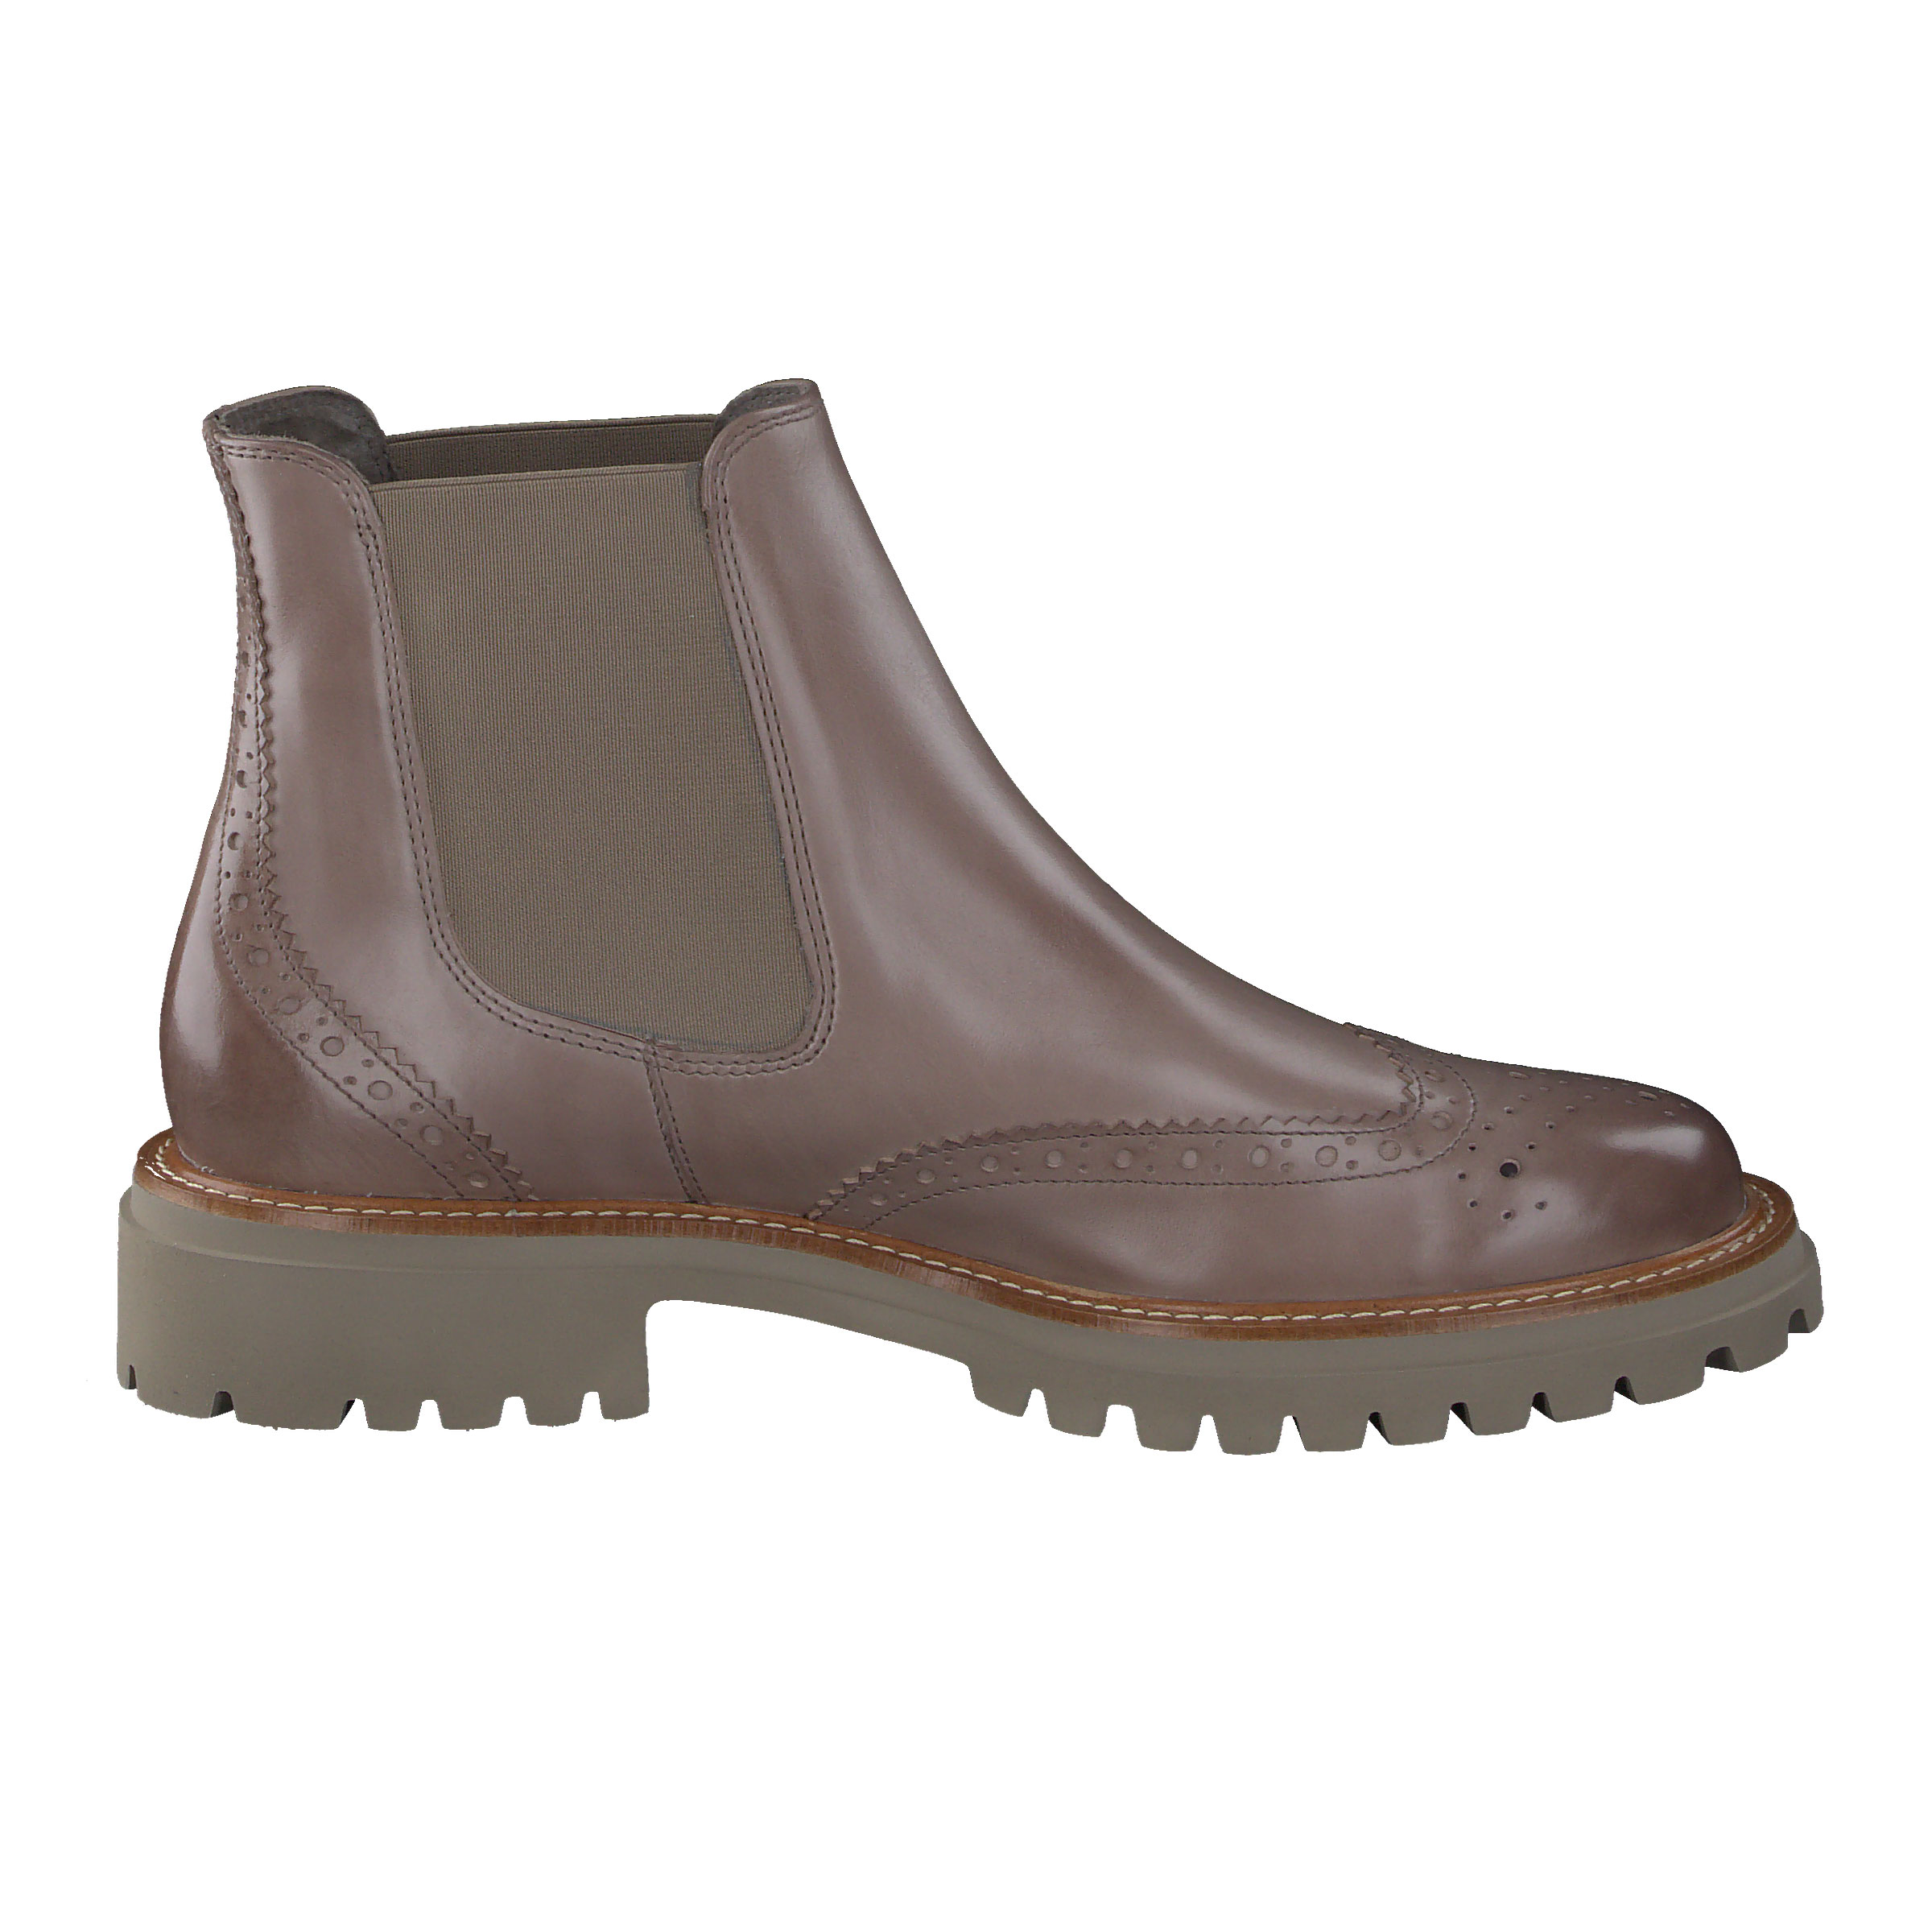 Paul Green Chelsea-Stiefelette - Beige smooth leather